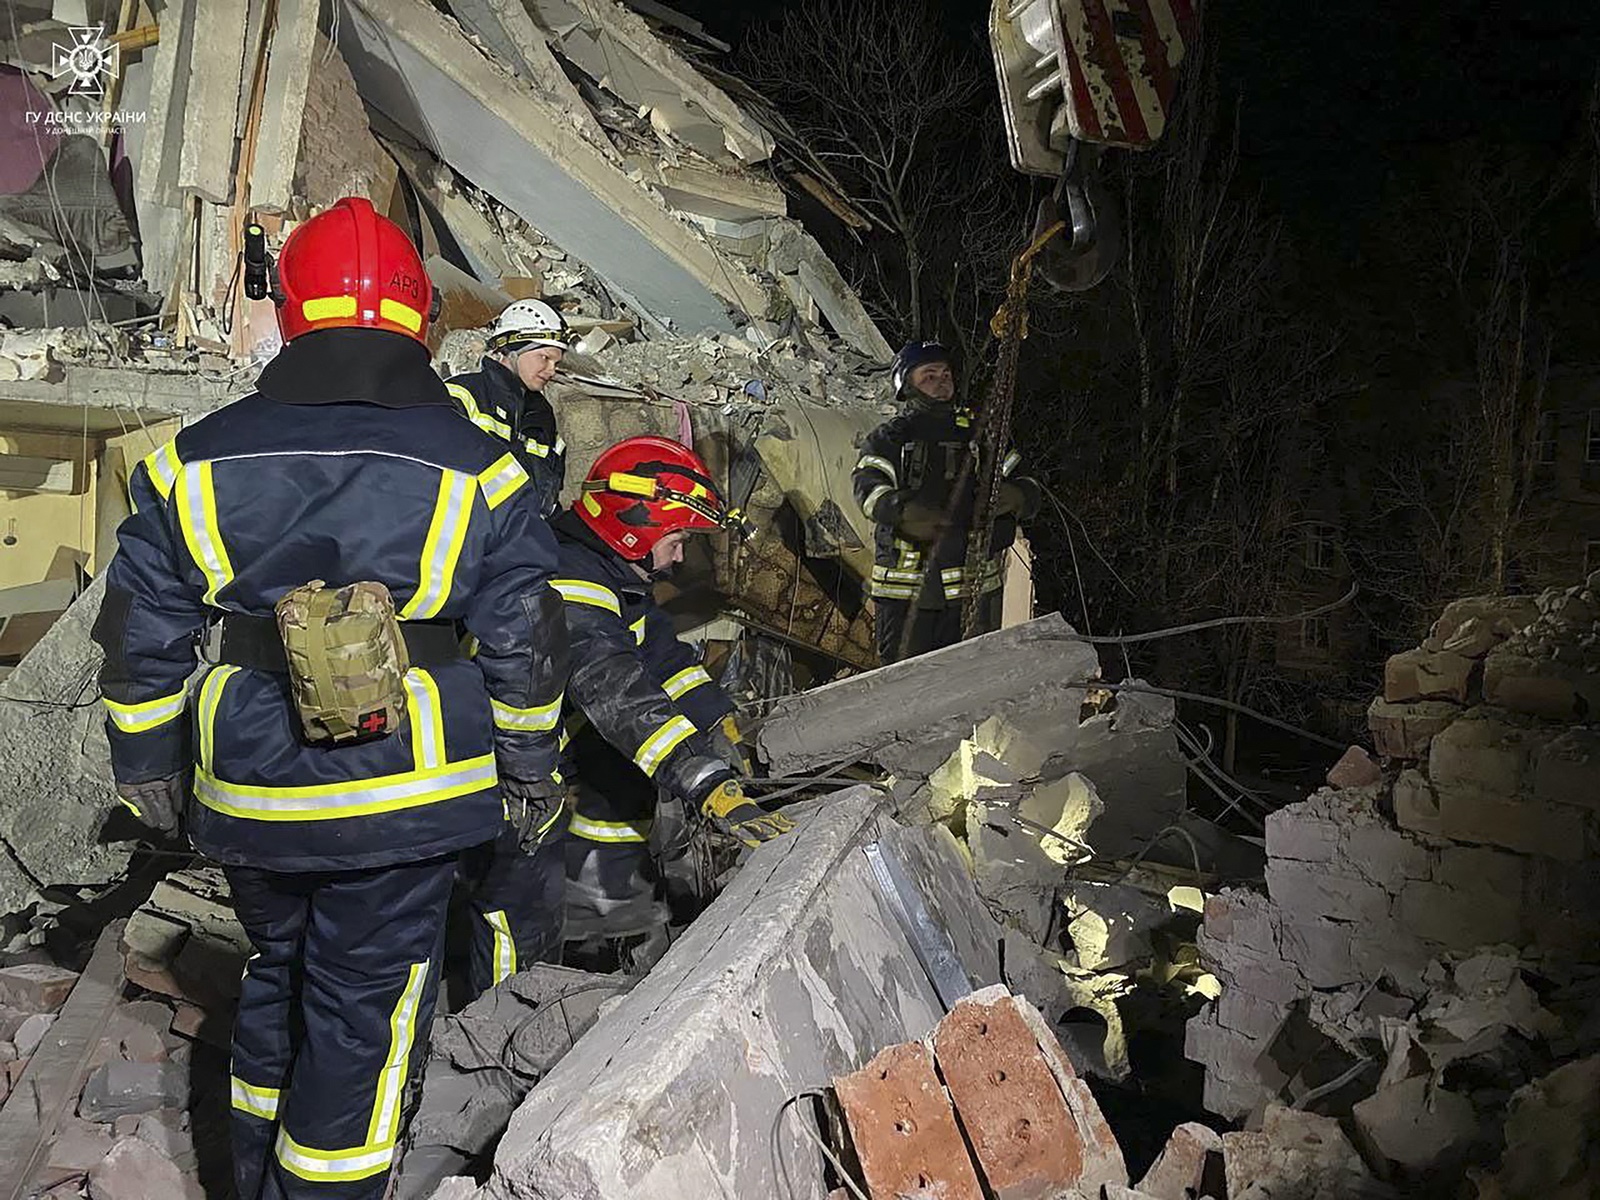 epa10975683 A handout photo made available by the Ukrainian Emergency Service shows rescuers working in the aftermath of an overnight shelling in the Selodove village, Donetsk region, Ukraine, 15 November 2023, amid the Russian invasion. Emergency services confirmed at least one person was killed in the attack while five other people, including a child, were evacuated from the damaged building.  EPA/STATE EMERGENCY SERVICE HANDOUT   HANDOUT EDITORIAL USE ONLY/NO SALES HANDOUT EDITORIAL USE ONLY/NO SALES